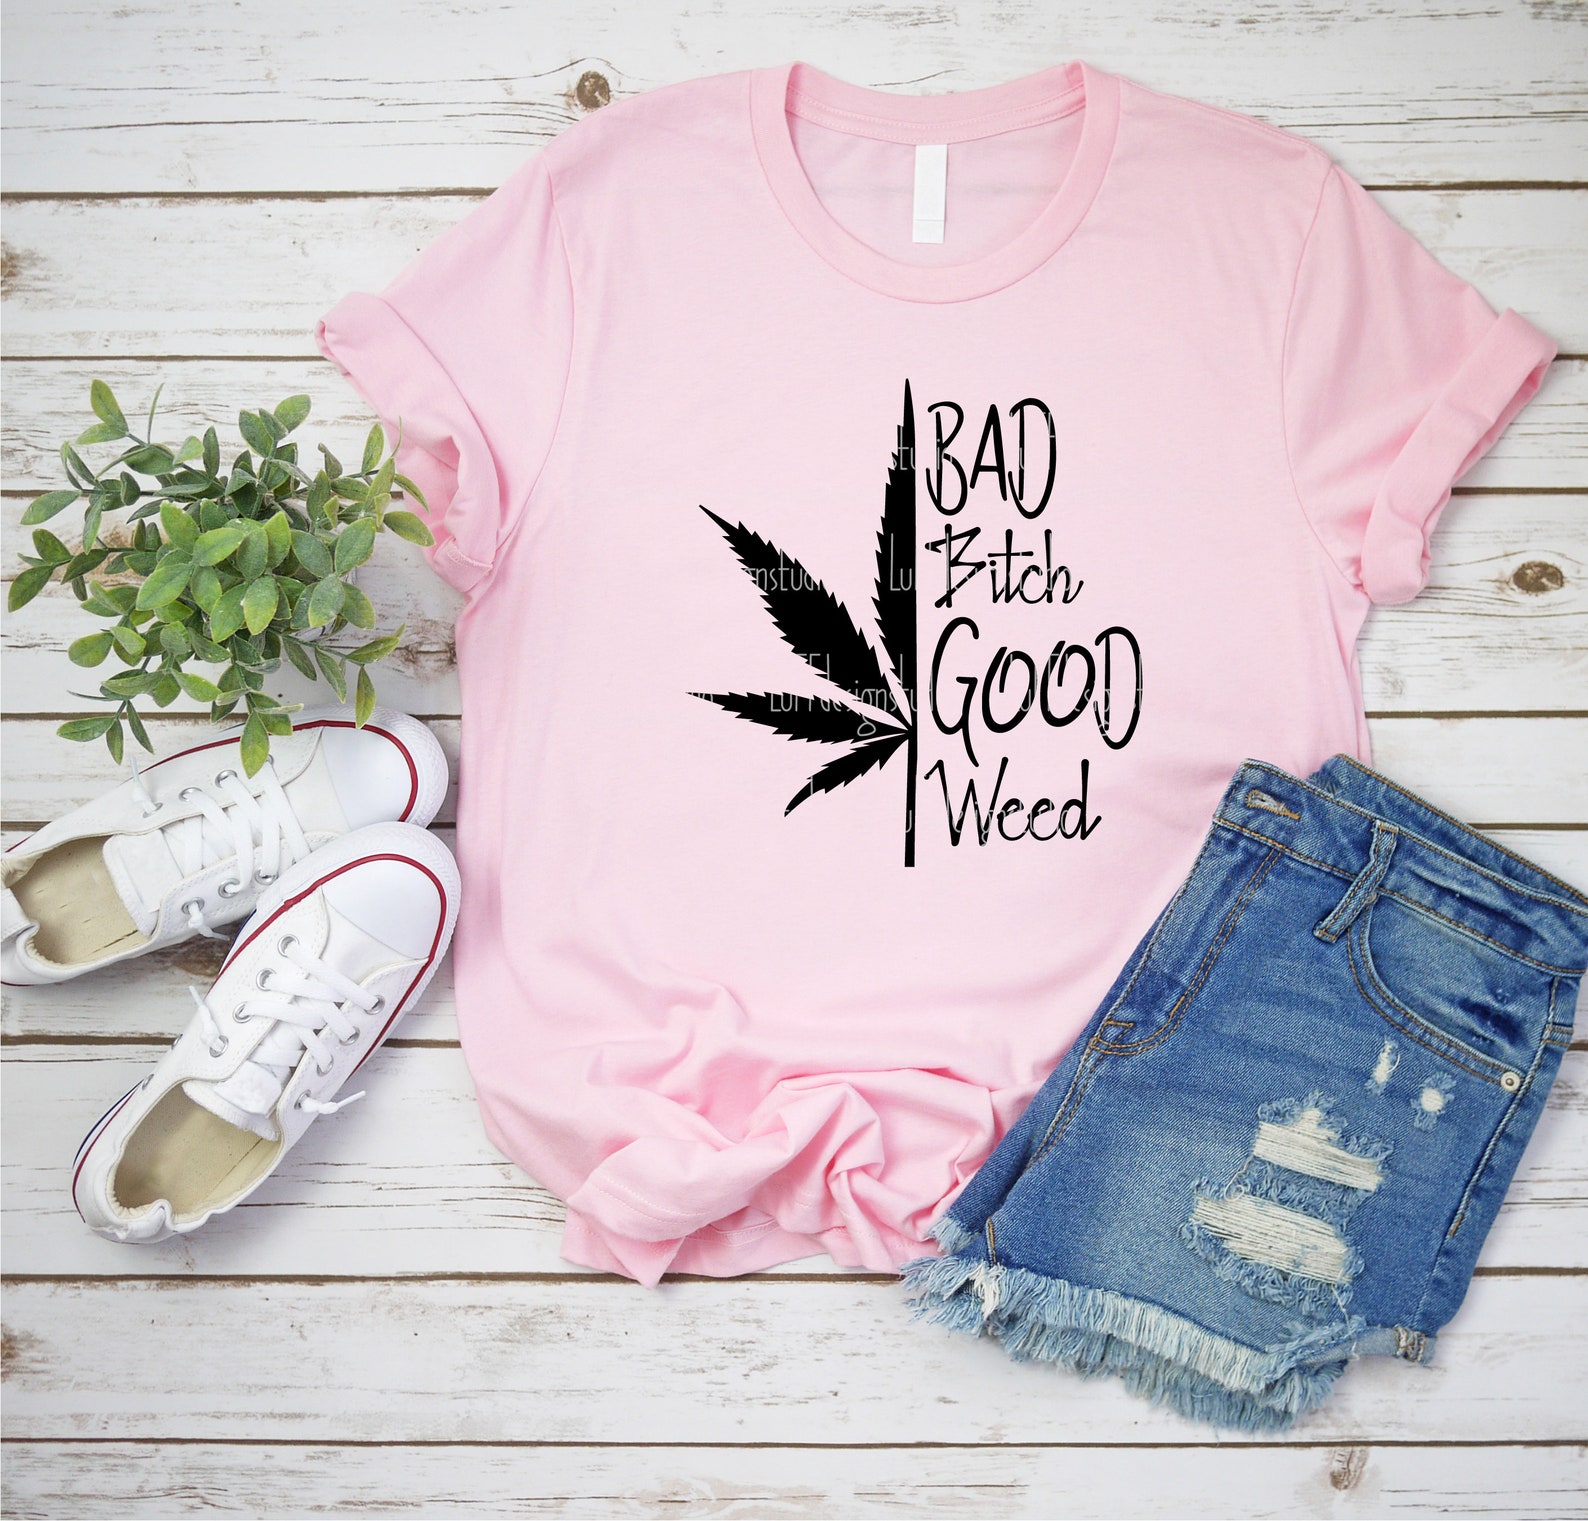 Pink t-shirt with the weed print.